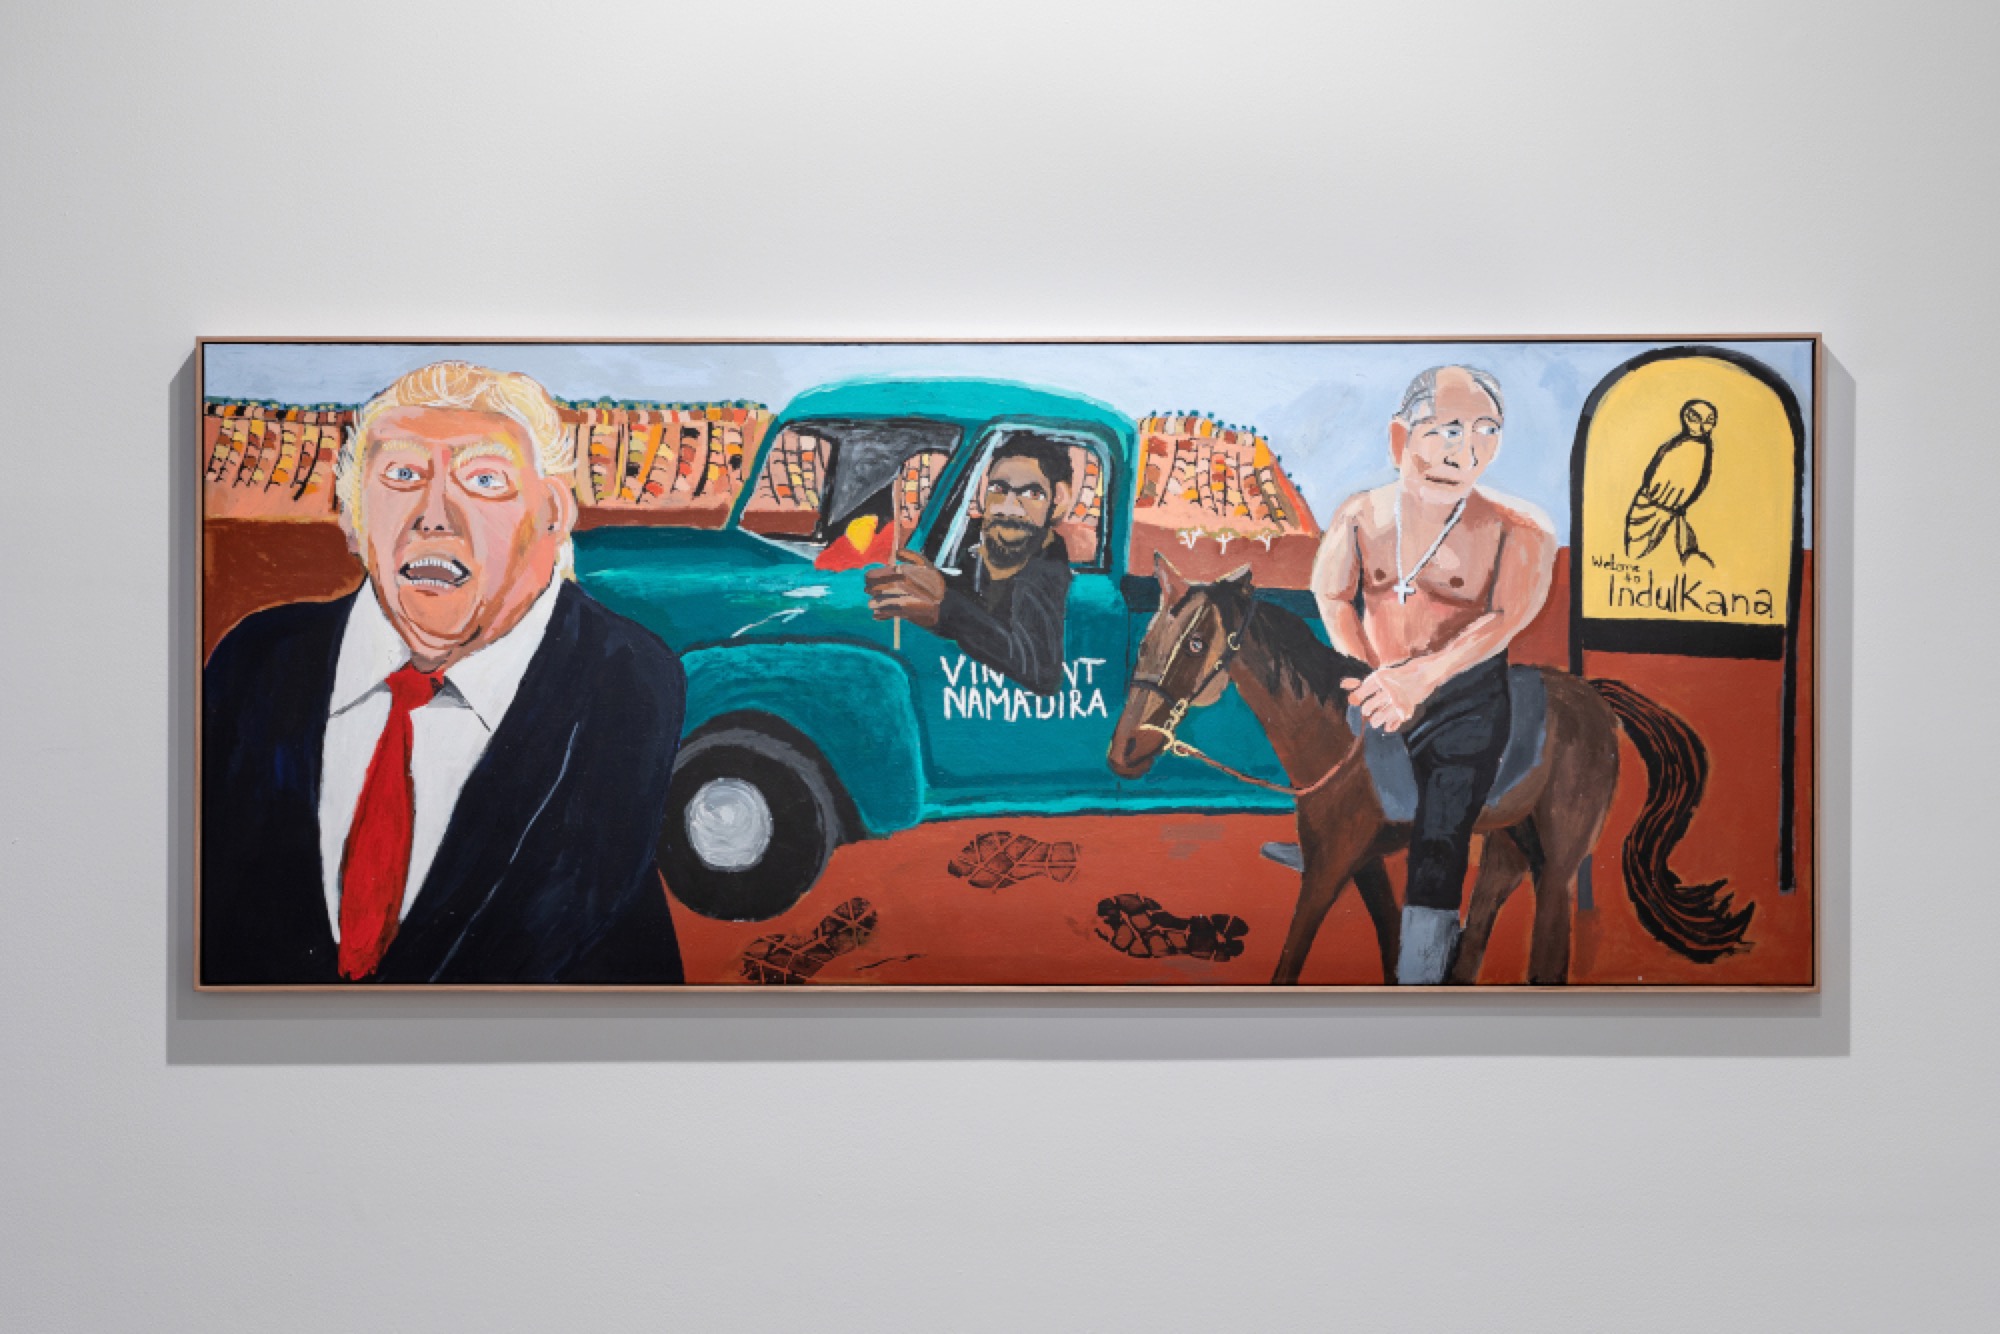 Vincent Namatjira, <em>Welcome to Indulkana</em> 2018, synthetic polymer paint on linen, 122.0 x 304.0 cm, installation view, Australian Centre for Contemporary Art, Melbourne. Courtesy the artist, Iwantja Arts, Indulkana and This is No Fantasy + Dianne Tanzer Gallery, Melbourne. Photograph: Andrew Curtis.